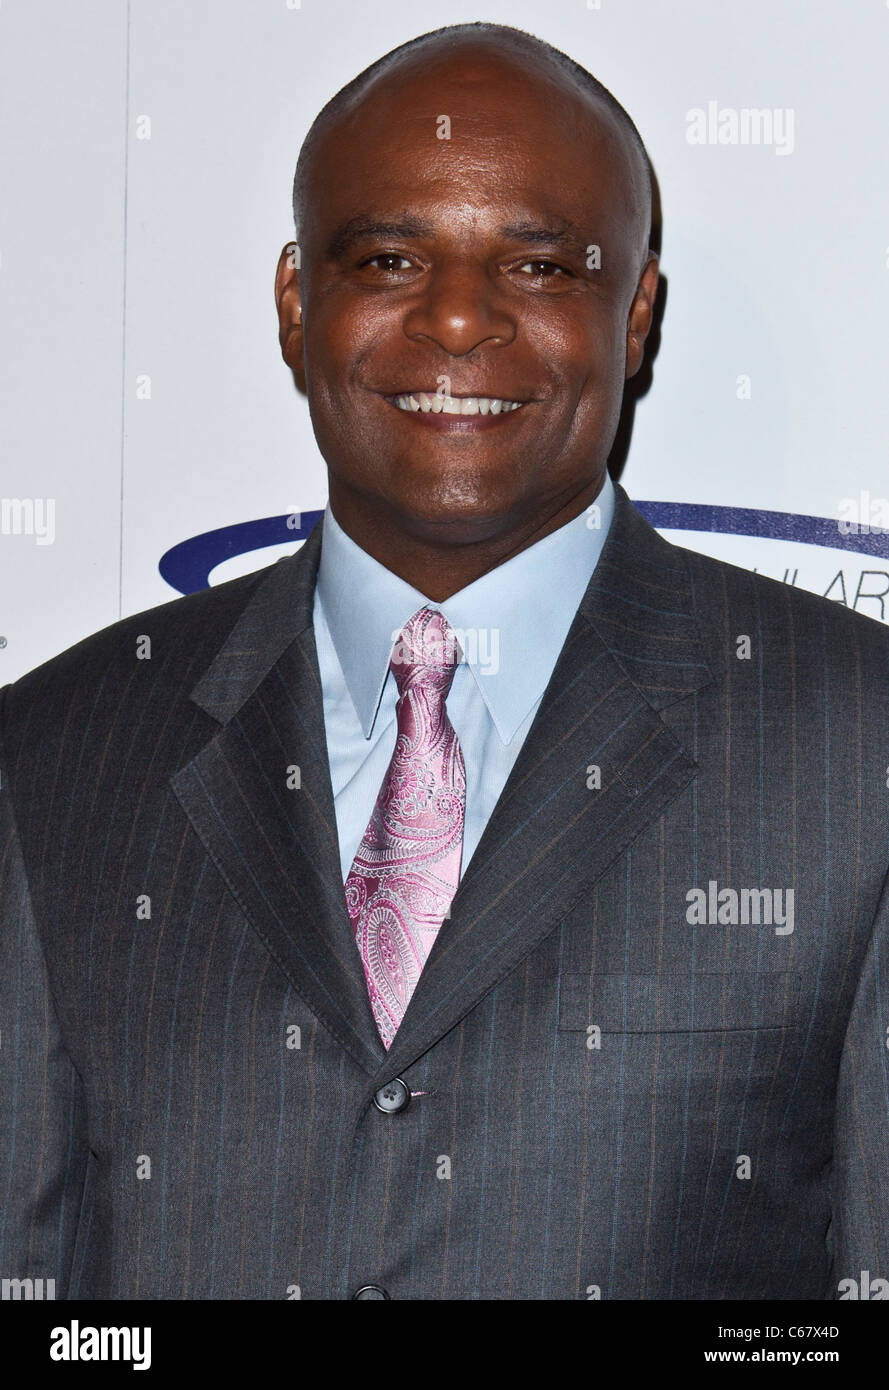 Warren Moon at arrivals for 26th Anniversary Sports Spectacular, Hyatt Regency Century Plaza Hotel, Los Angeles, CA May 22, 2011. Photo By: Emiley Schweich/Everett Collection Stock Photo